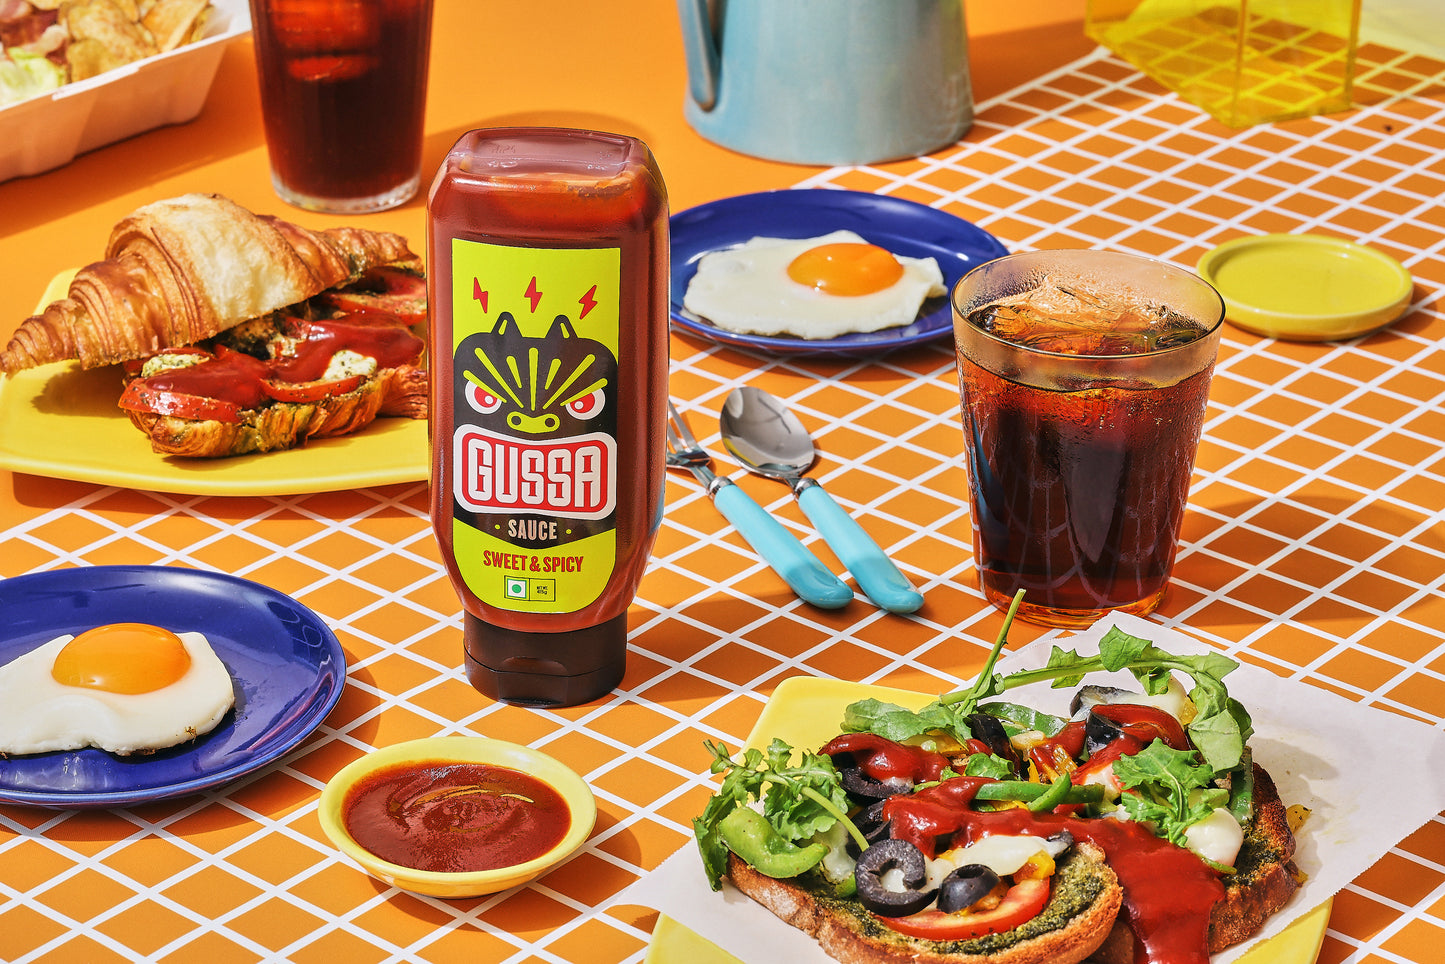 GUSSA Sweet & Spicy Sauce